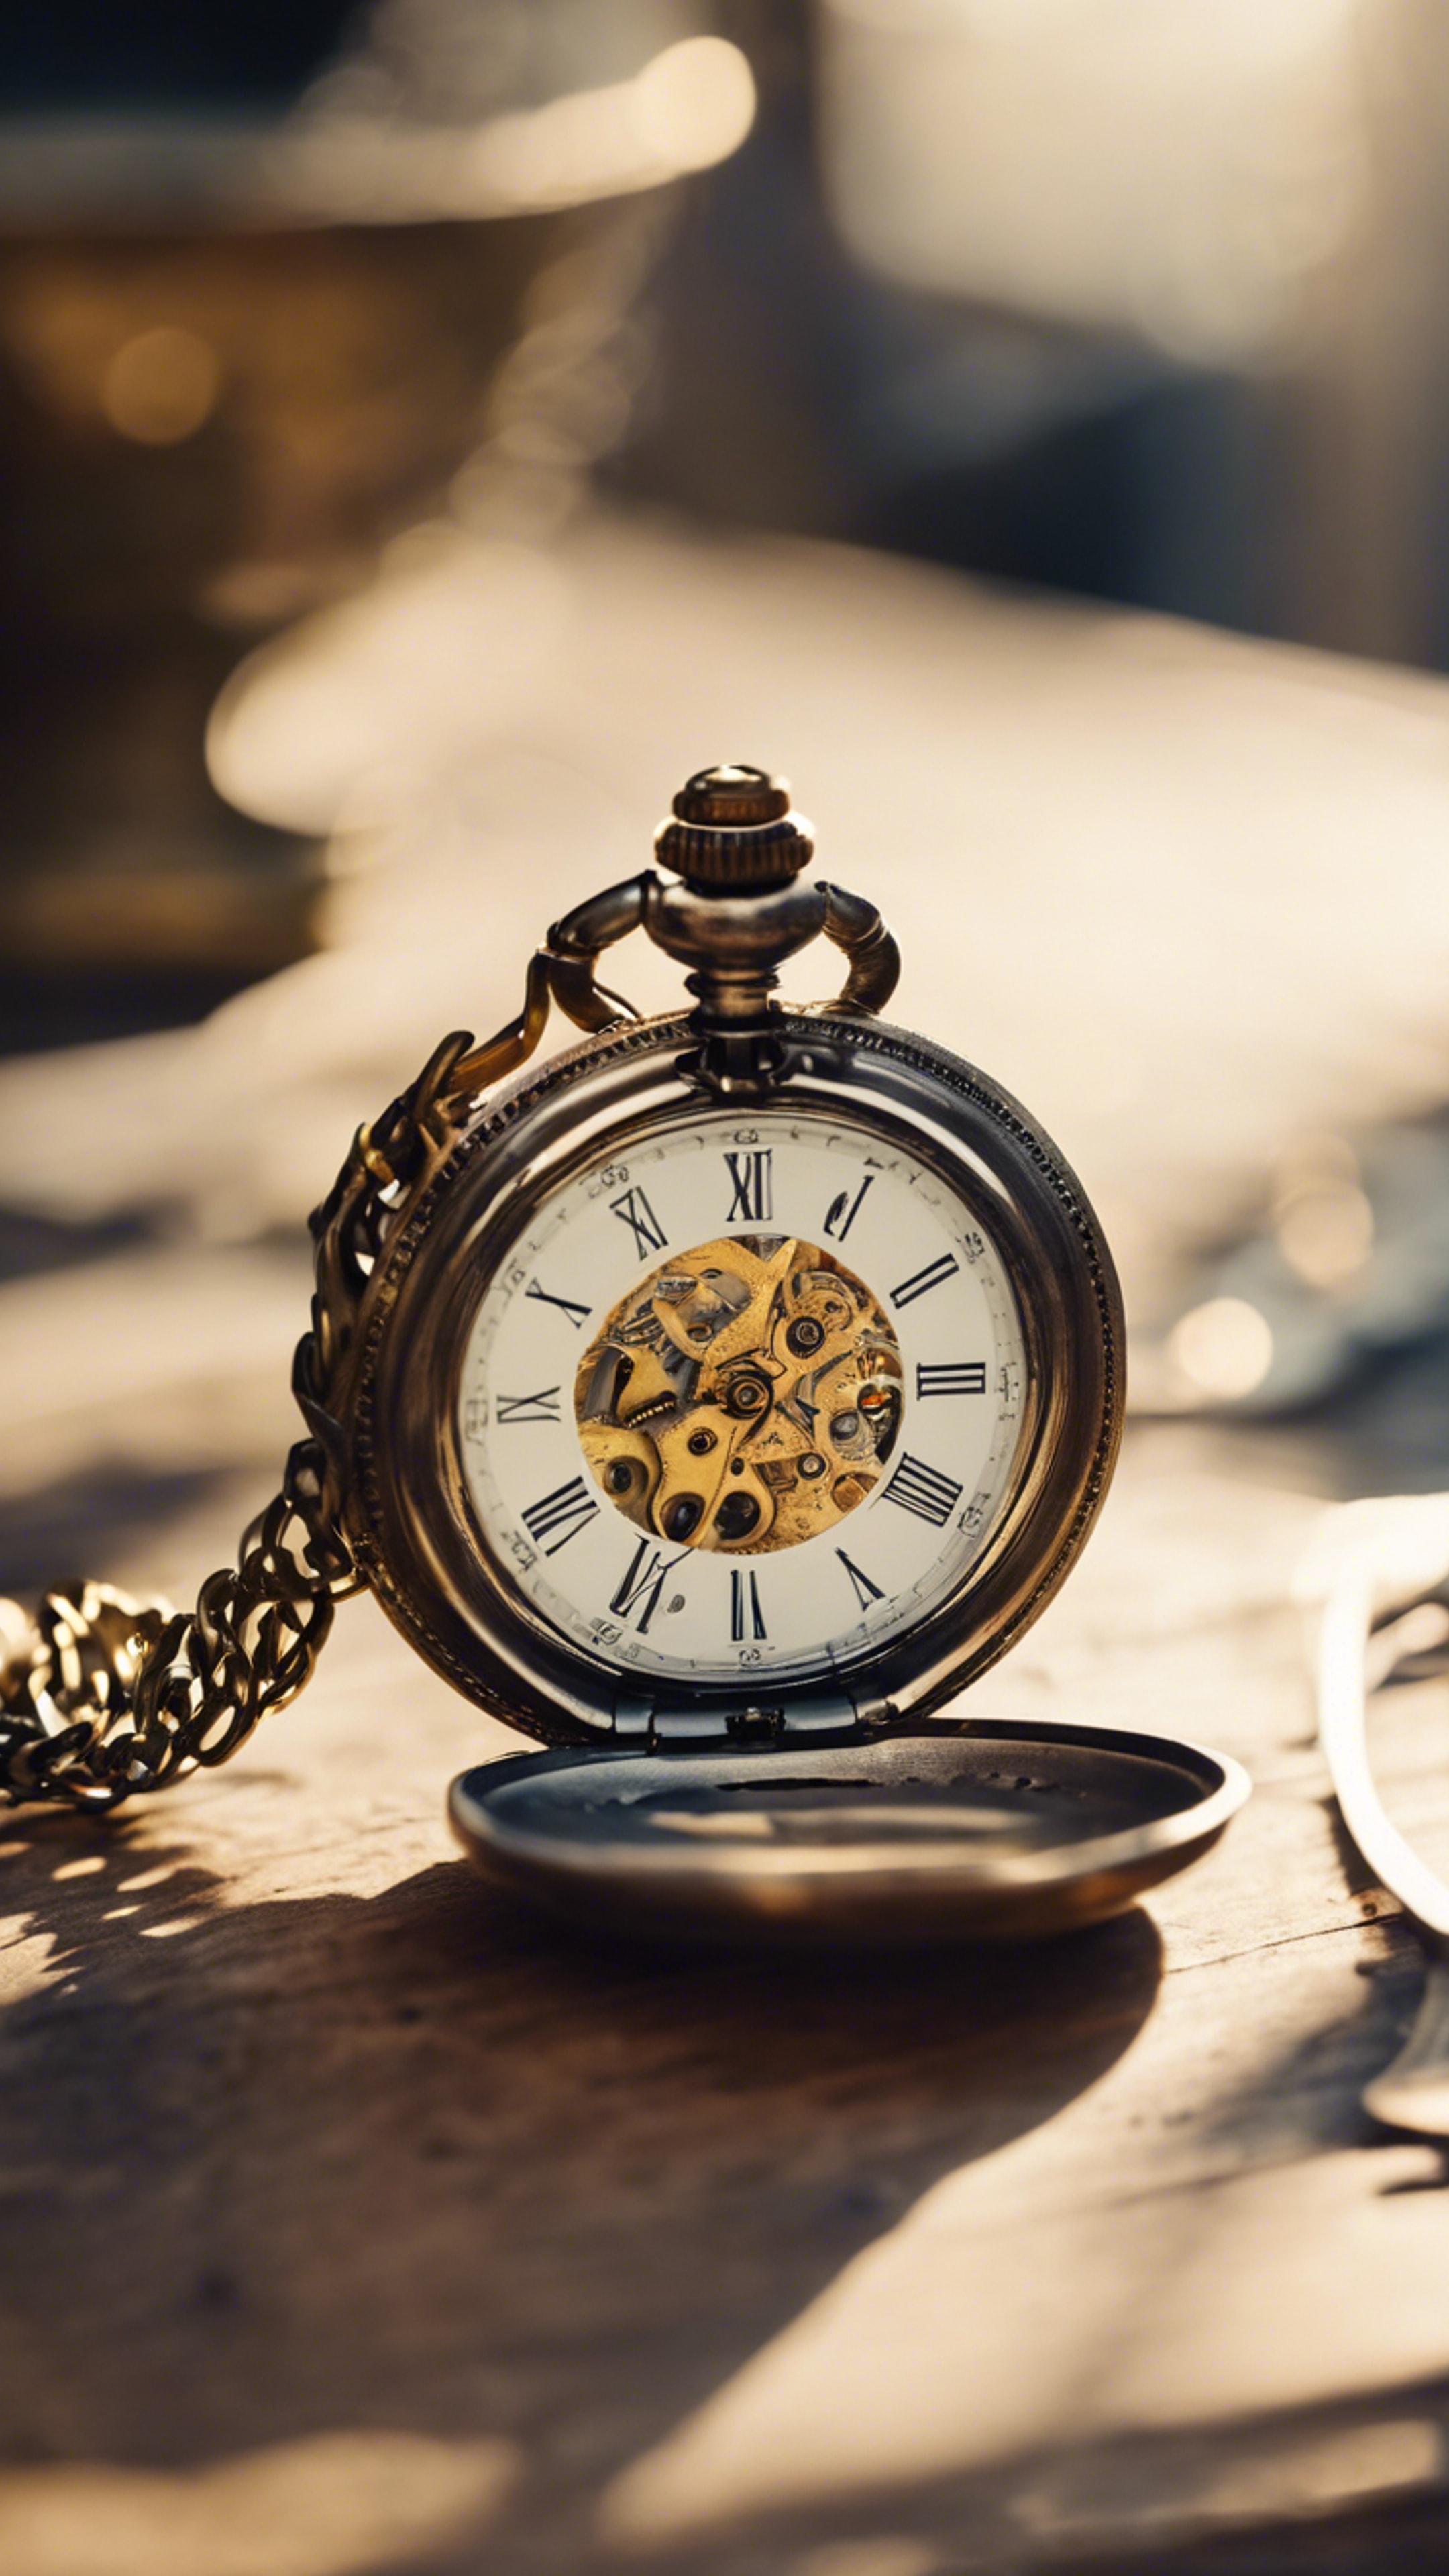 A vintage pocket watch, lying open on an antique table, reflecting the golden rays of afternoon sun. Kertas dinding[0f0622e1f4f2468db79b]